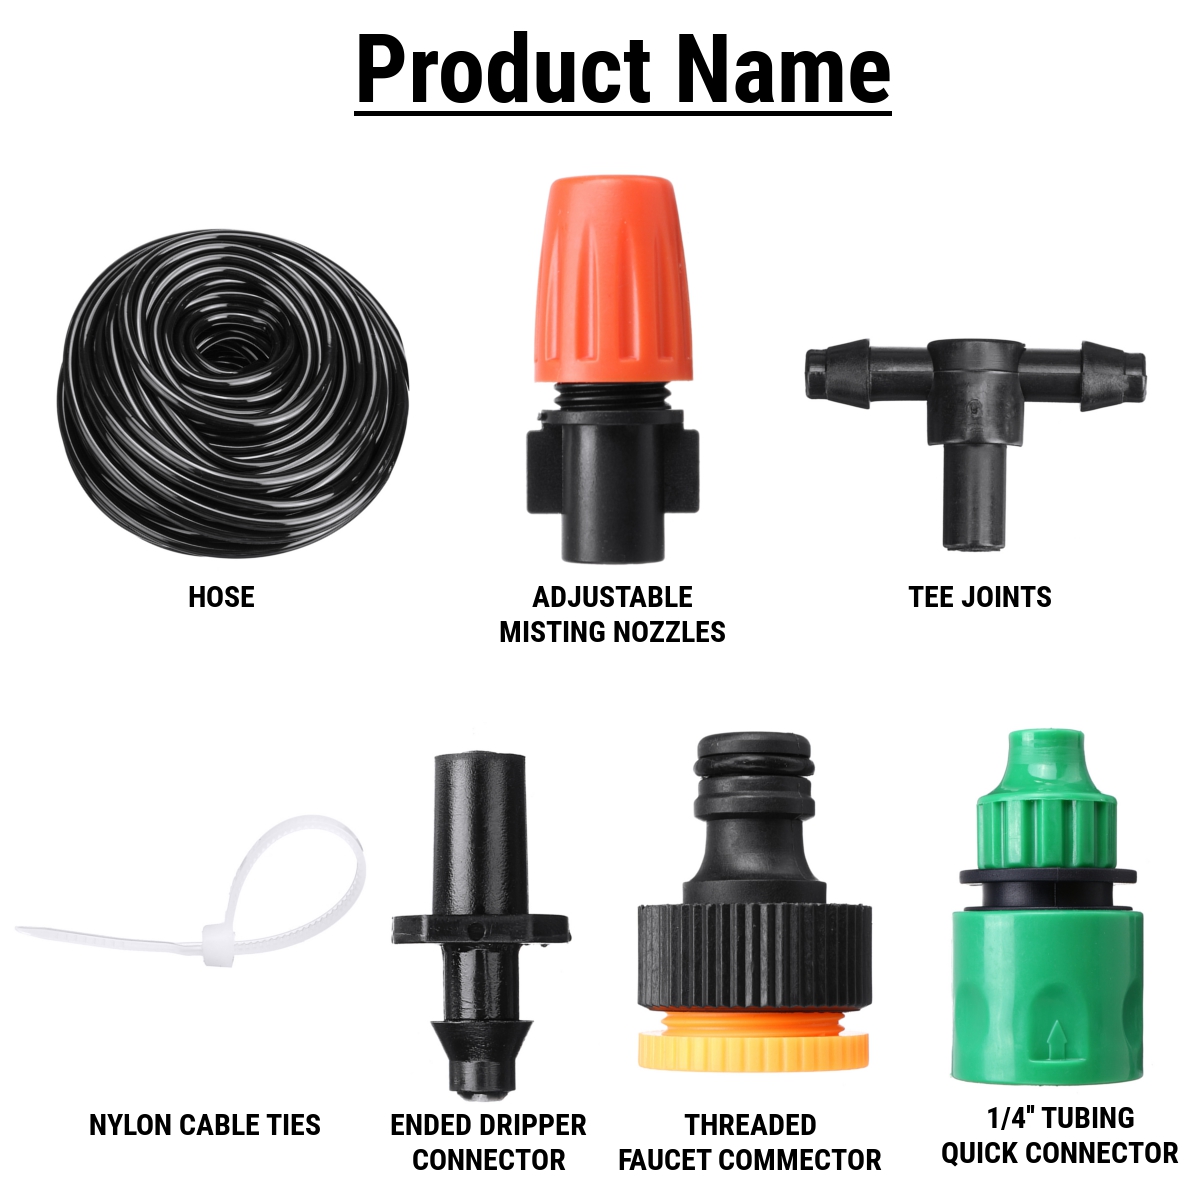 Adjustable-Water-Misting-Cooling-Irrigation-System-Kit-Tubing-Hose-5M8M10M15M20M25M-with-Mist-Nozzle-1687301-3